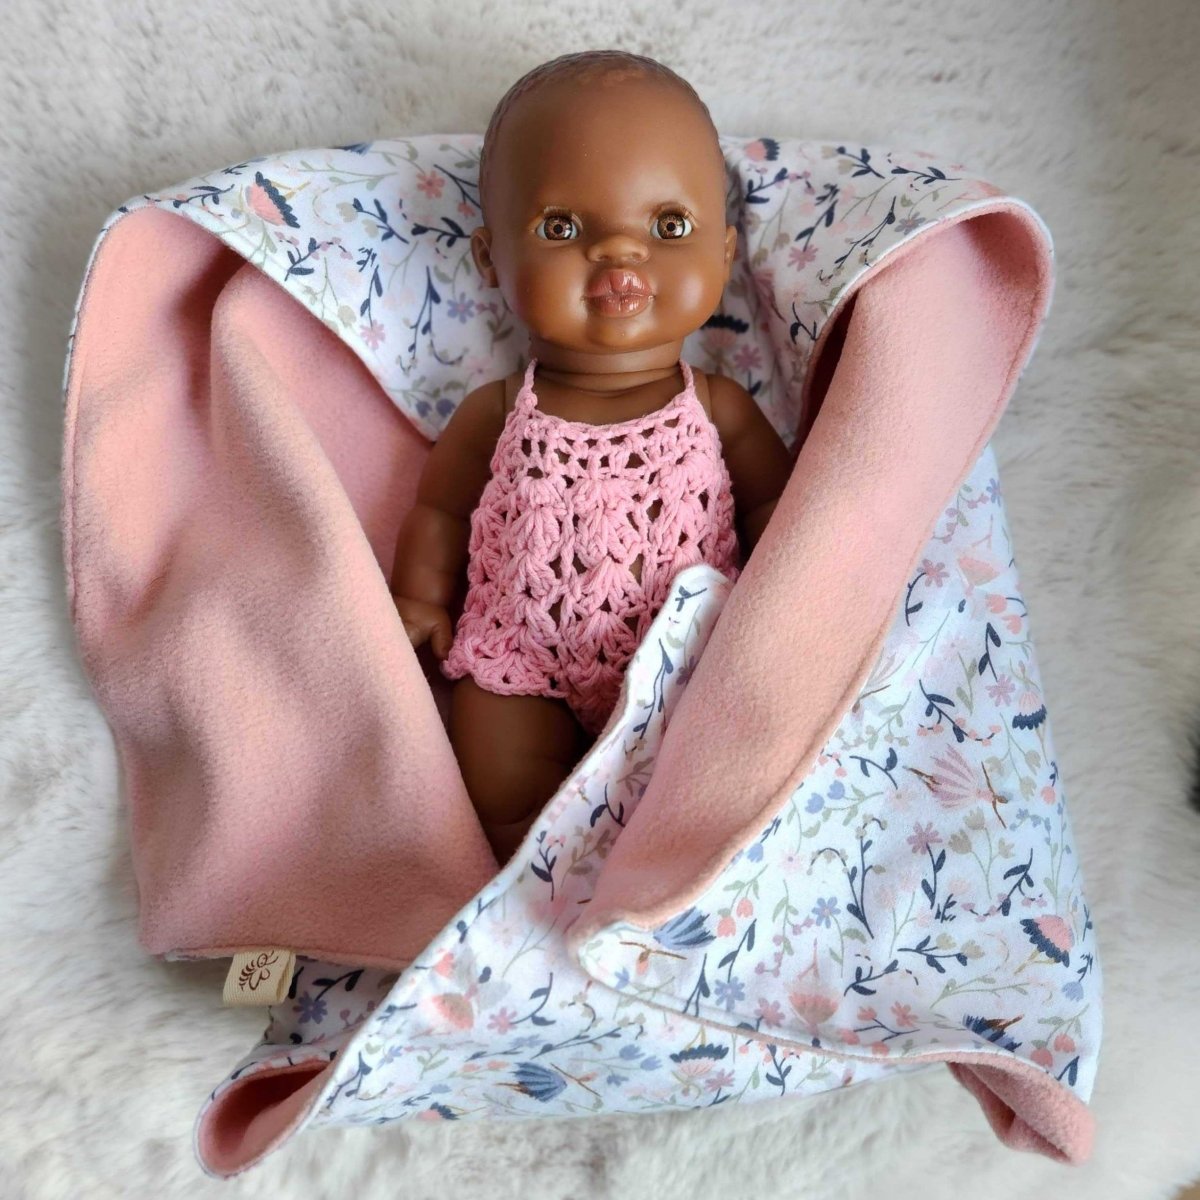 Baby Doll Swaddle Blanket - Floral